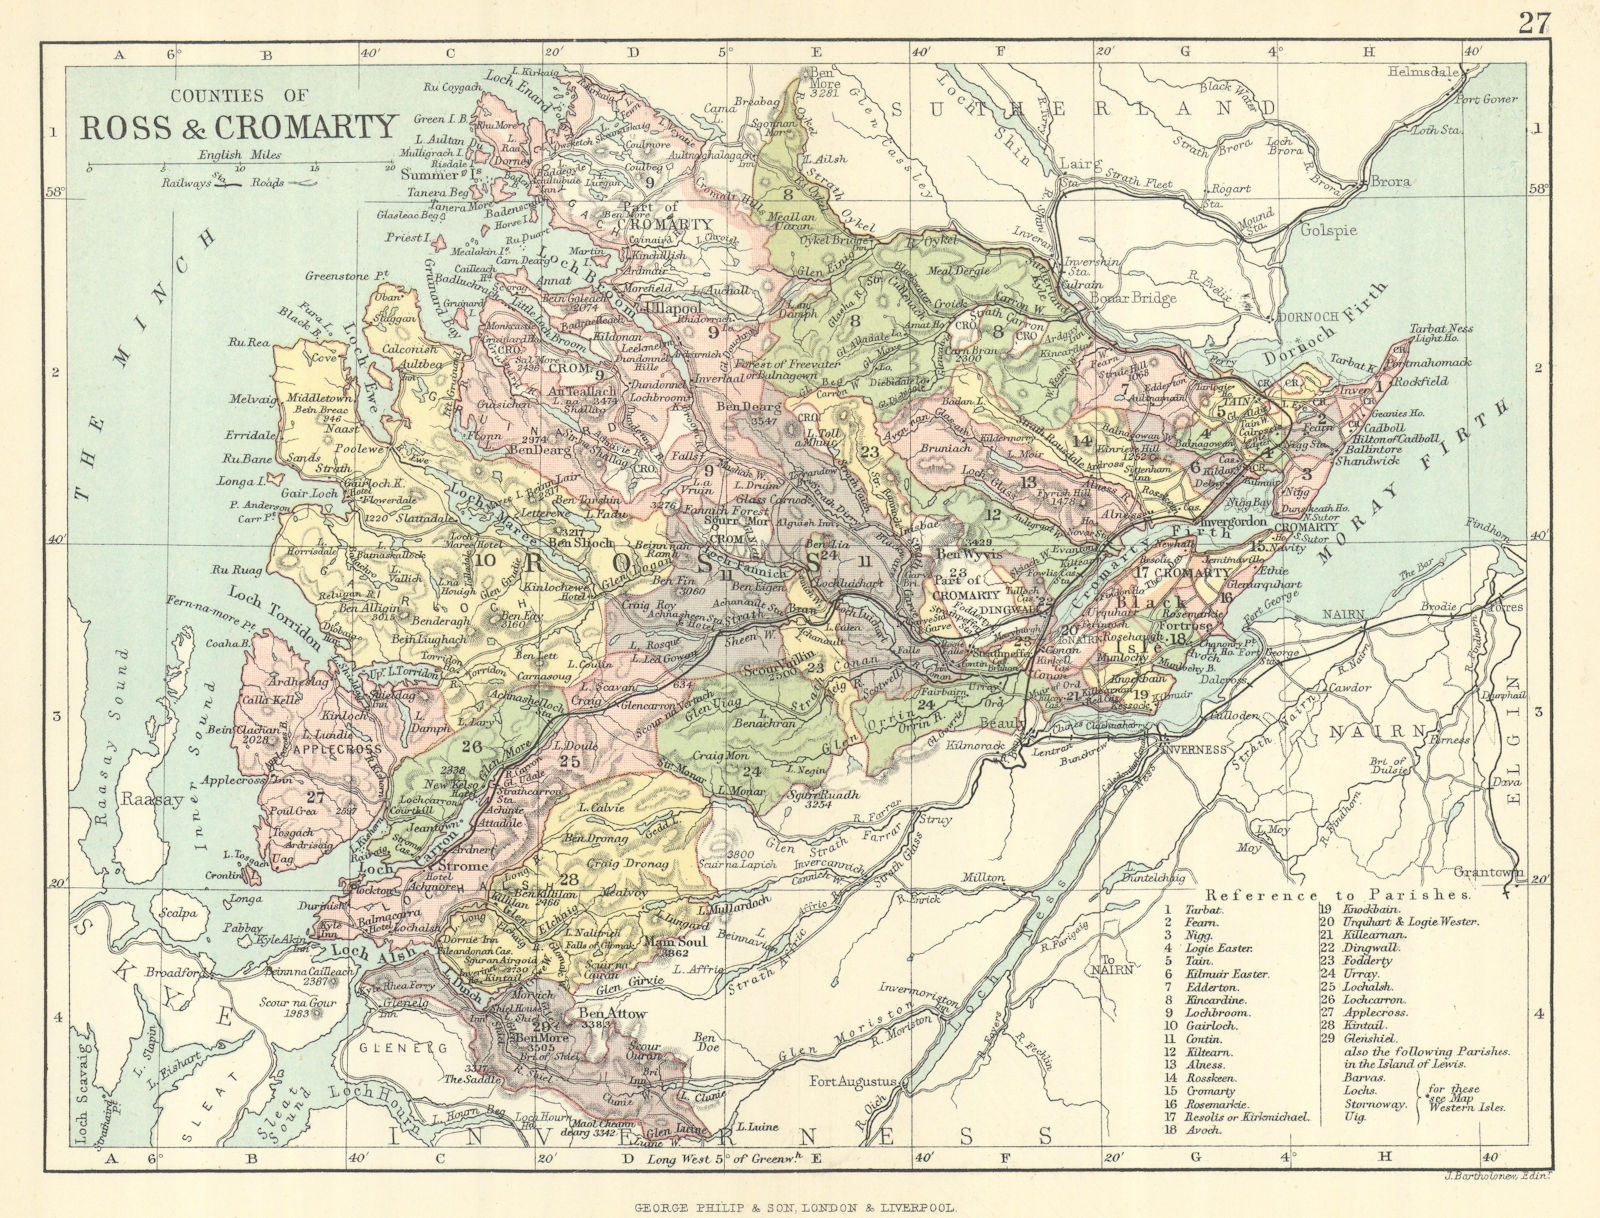 Associate Product 'Counties of Ross & Cromarty'. Ross-shire & Cromartyshire. BARTHOLOMEW 1888 map